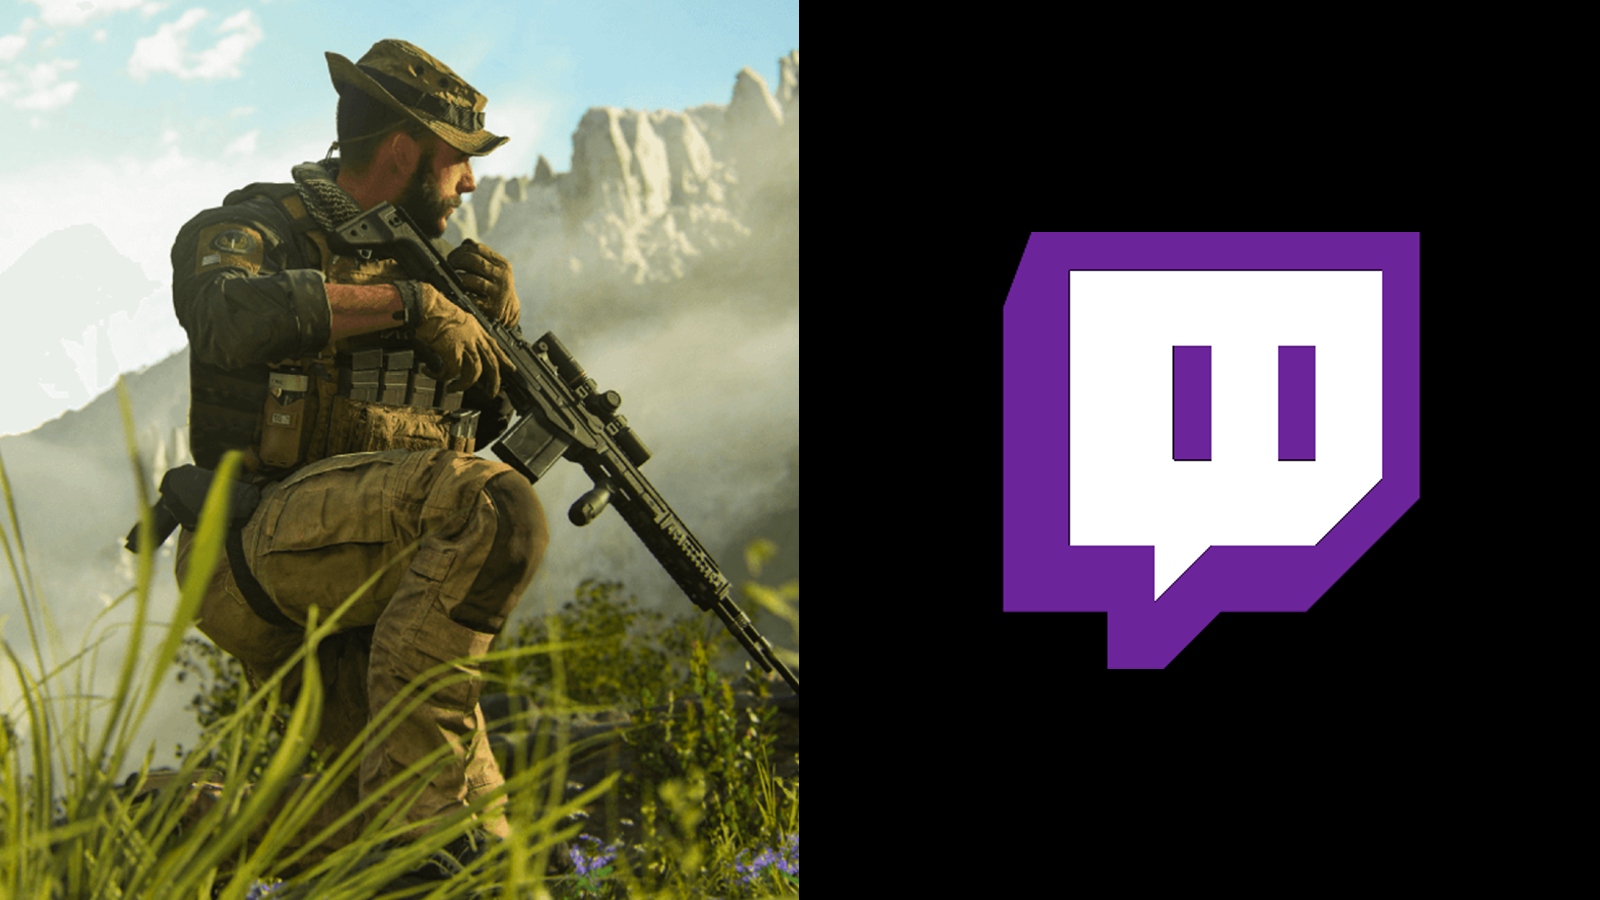 The little-known streamer beats Scump, Symfuhny, and more in MW3 Twitch viewership ratings